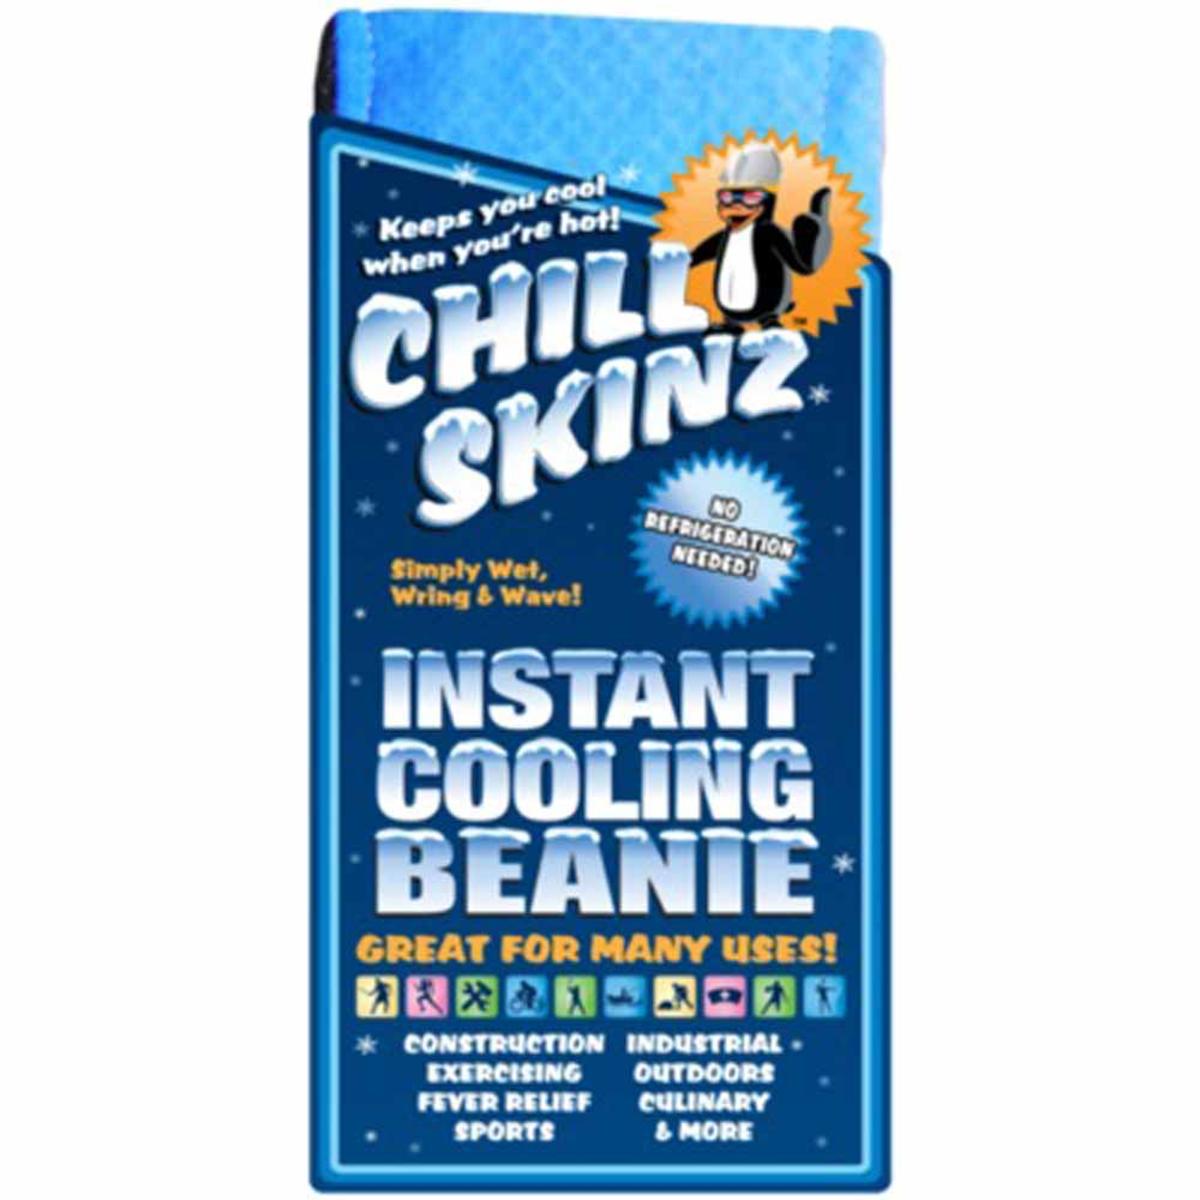 Chill Skinz Instant Cooling Beanies